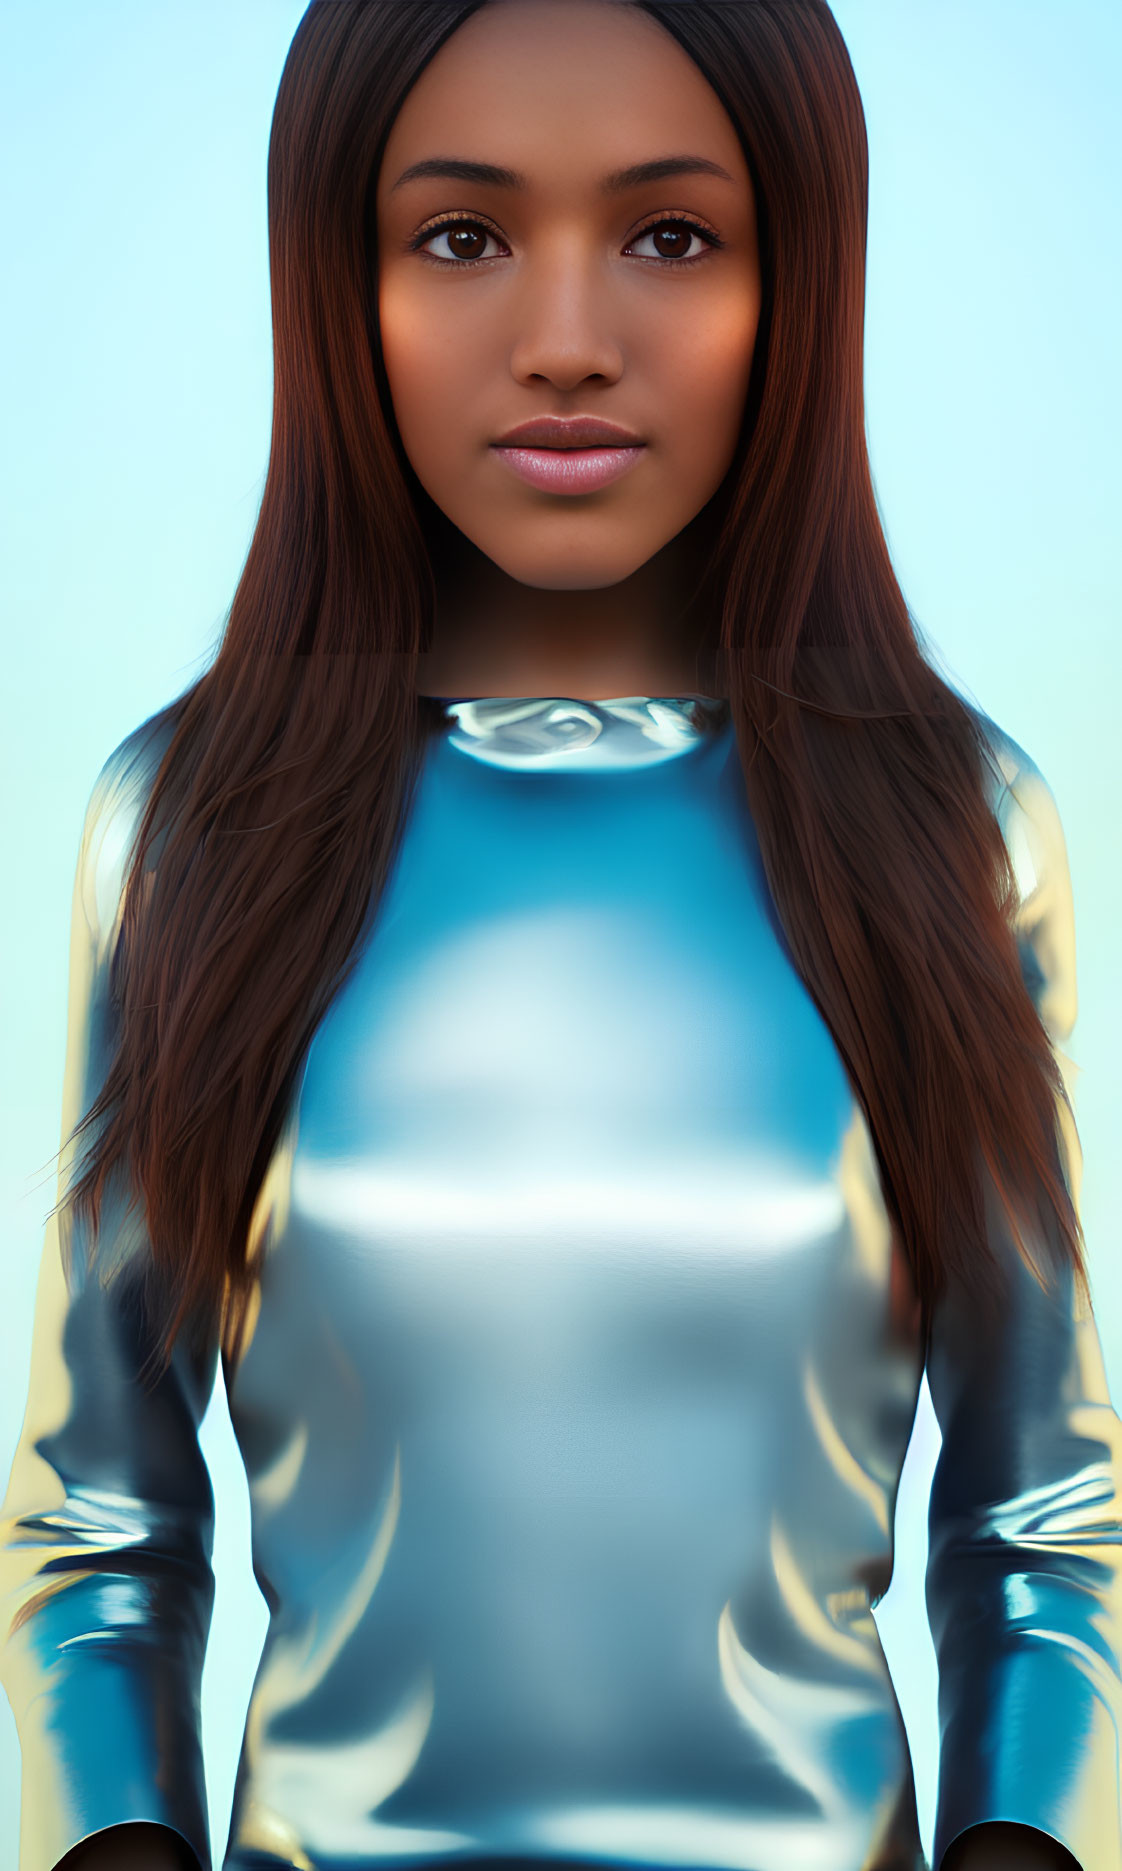 Brown-eyed woman in futuristic blue and gold suit on blue backdrop